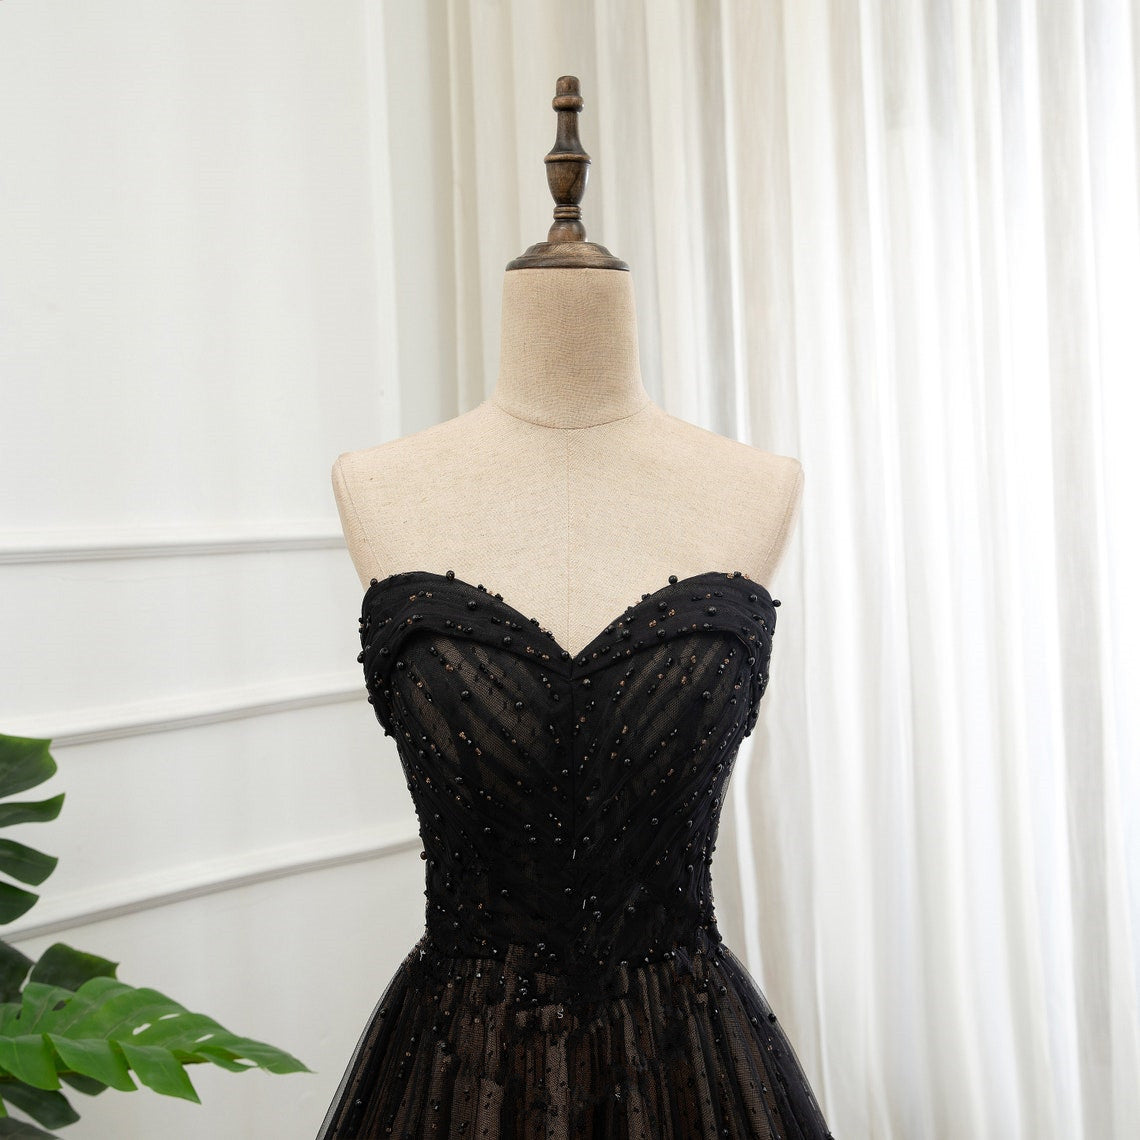 Country Wedding Dress, Black Tulle Sweetheart A-line Formal Dress with Lace, Black Long Prom Dress